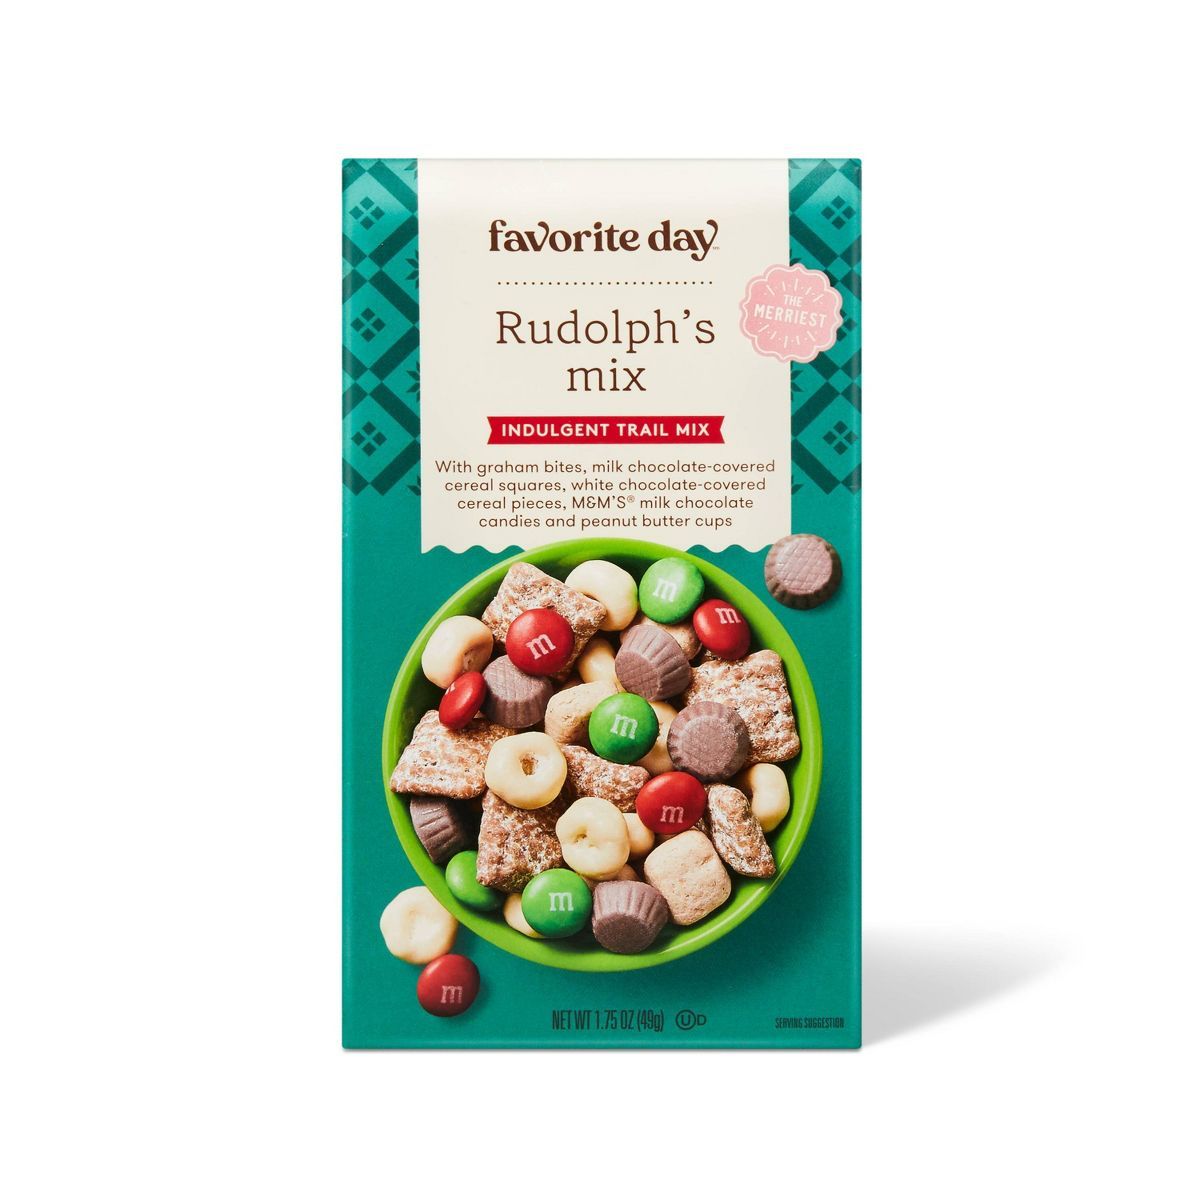 Holiday Rudolph's Mix Indulgent Snack Mix Stocking Stuffer - 1.75oz - Favorite Day™ | Target